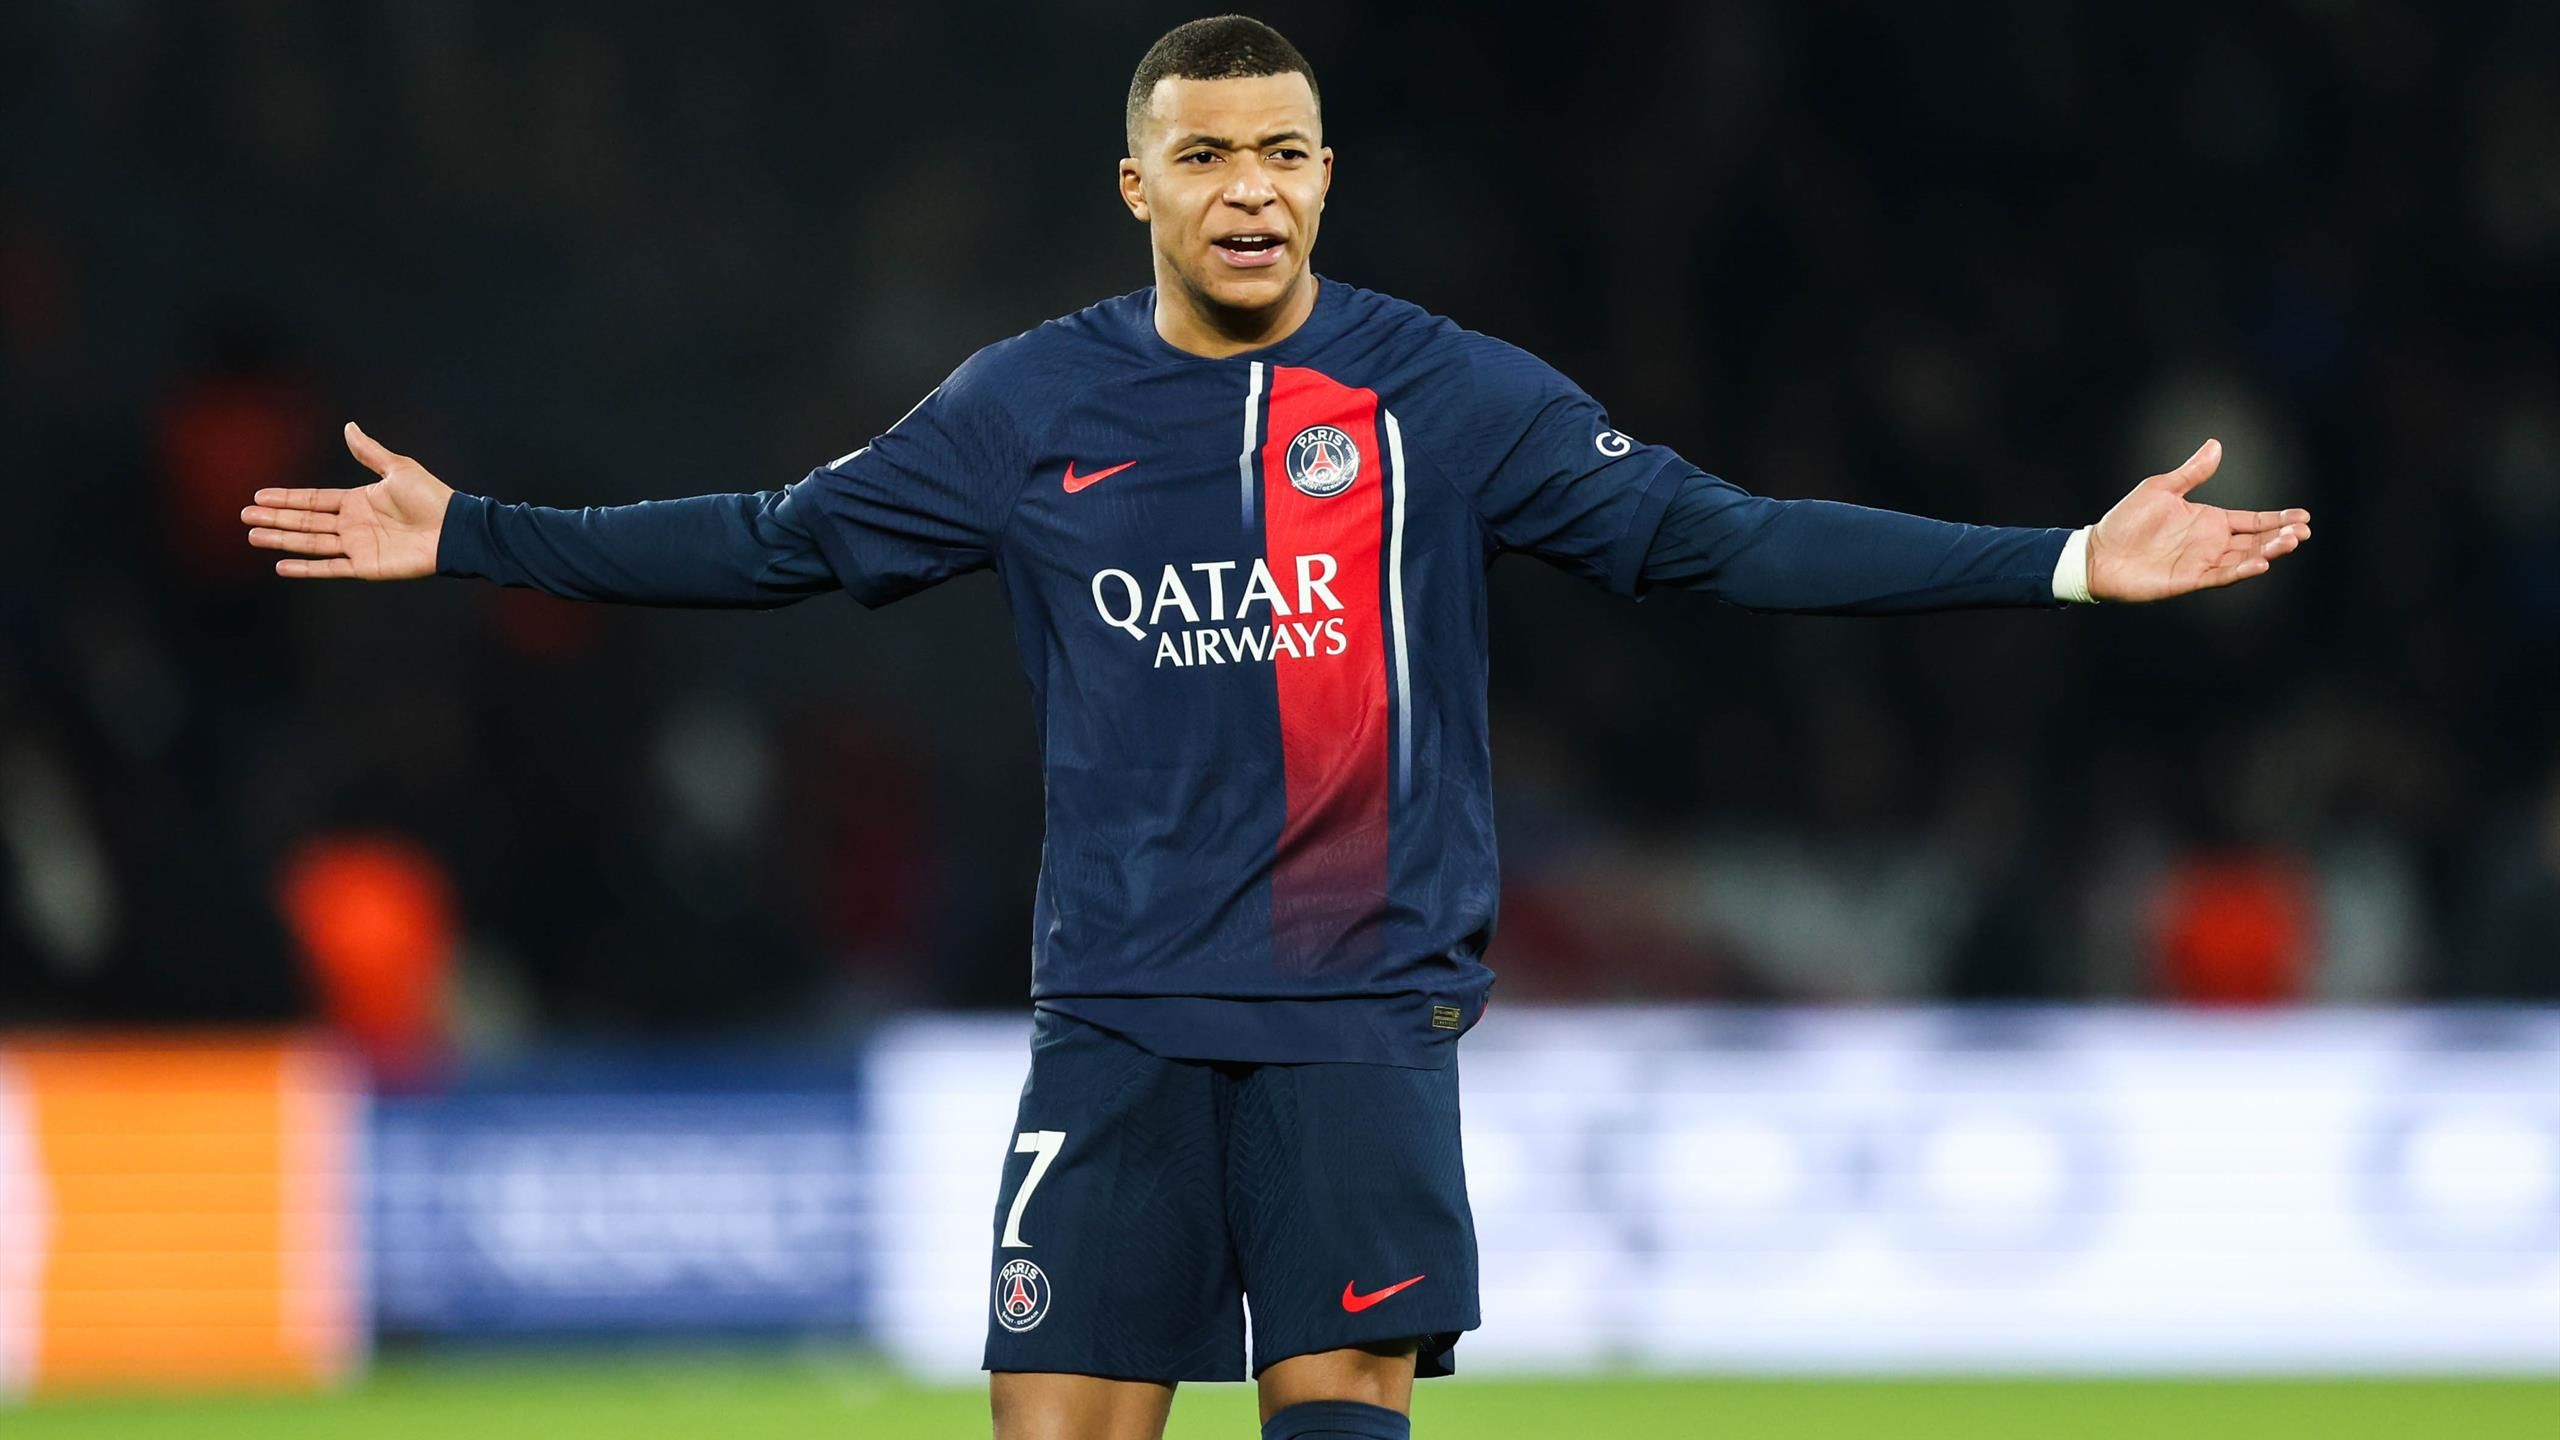 Kylian Mbappe transfer: Kylian Mbappe of PSG to sign biggest